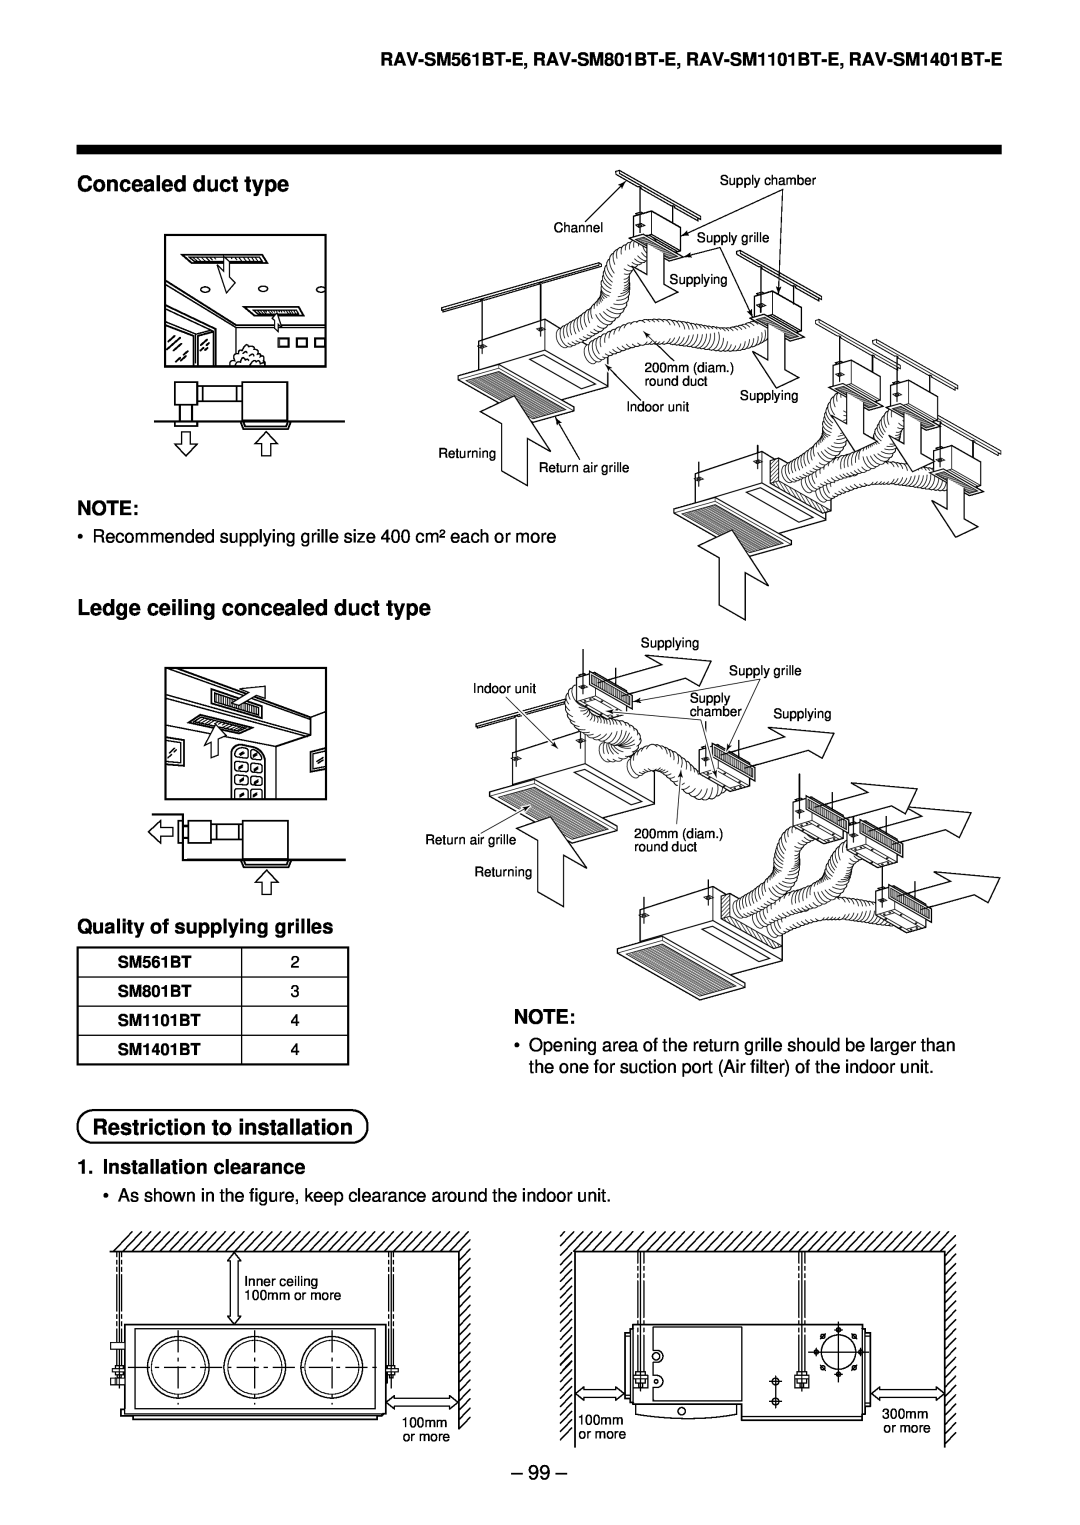 Toshiba RAV-SM561AT-E, RAV-SM1101AT-E Concealed duct type, Ledge ceiling concealed duct type, Restriction to installation 